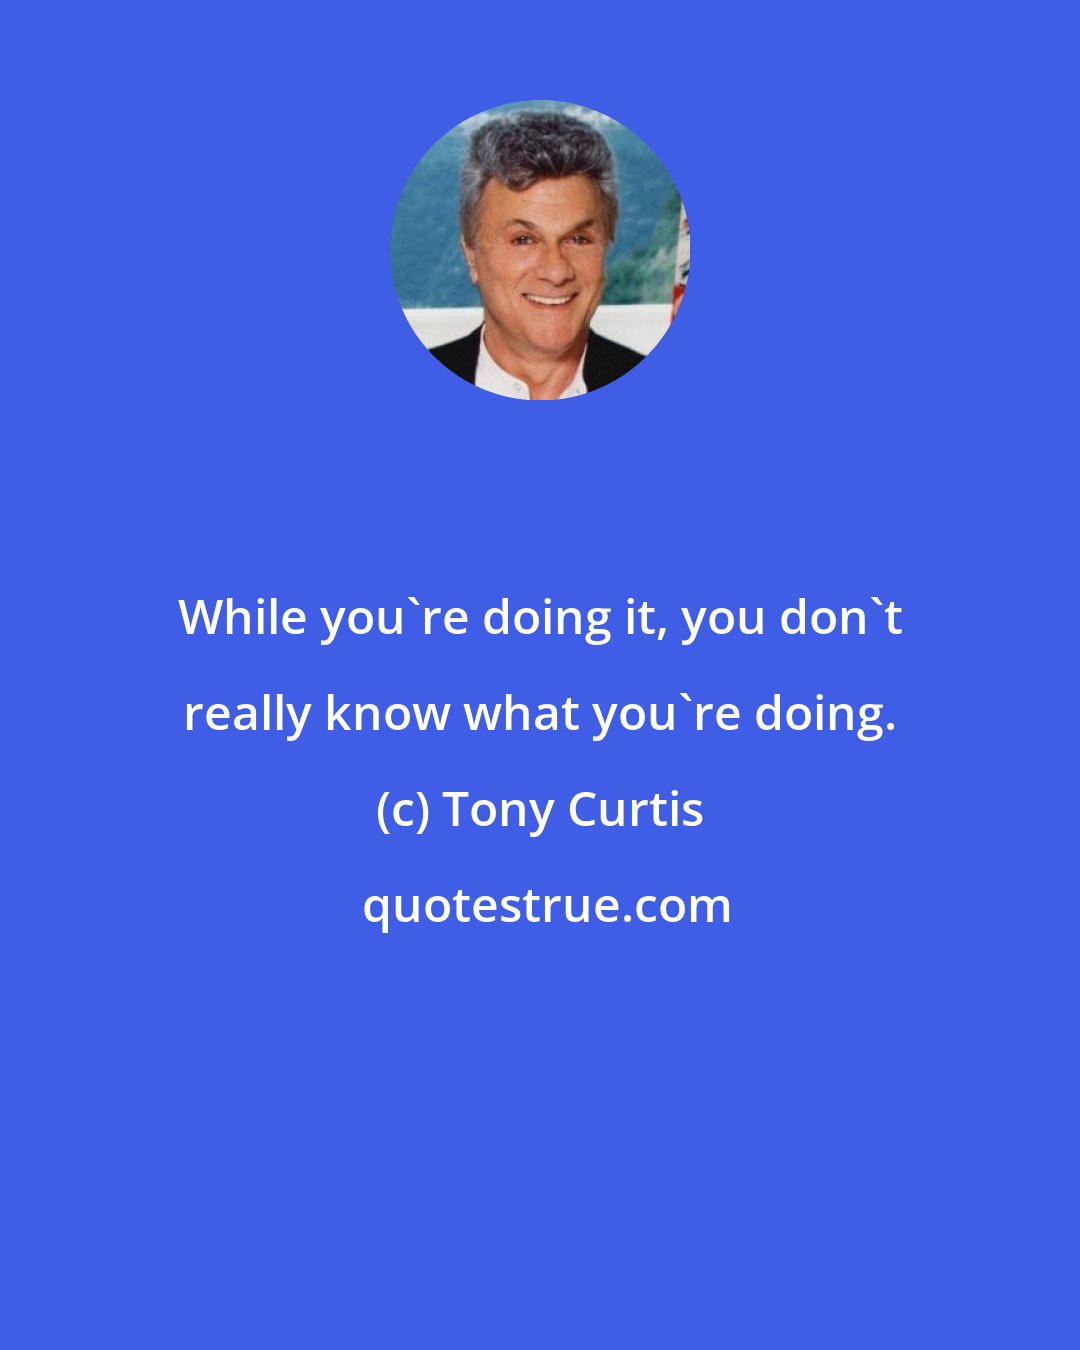 Tony Curtis: While you're doing it, you don't really know what you're doing.